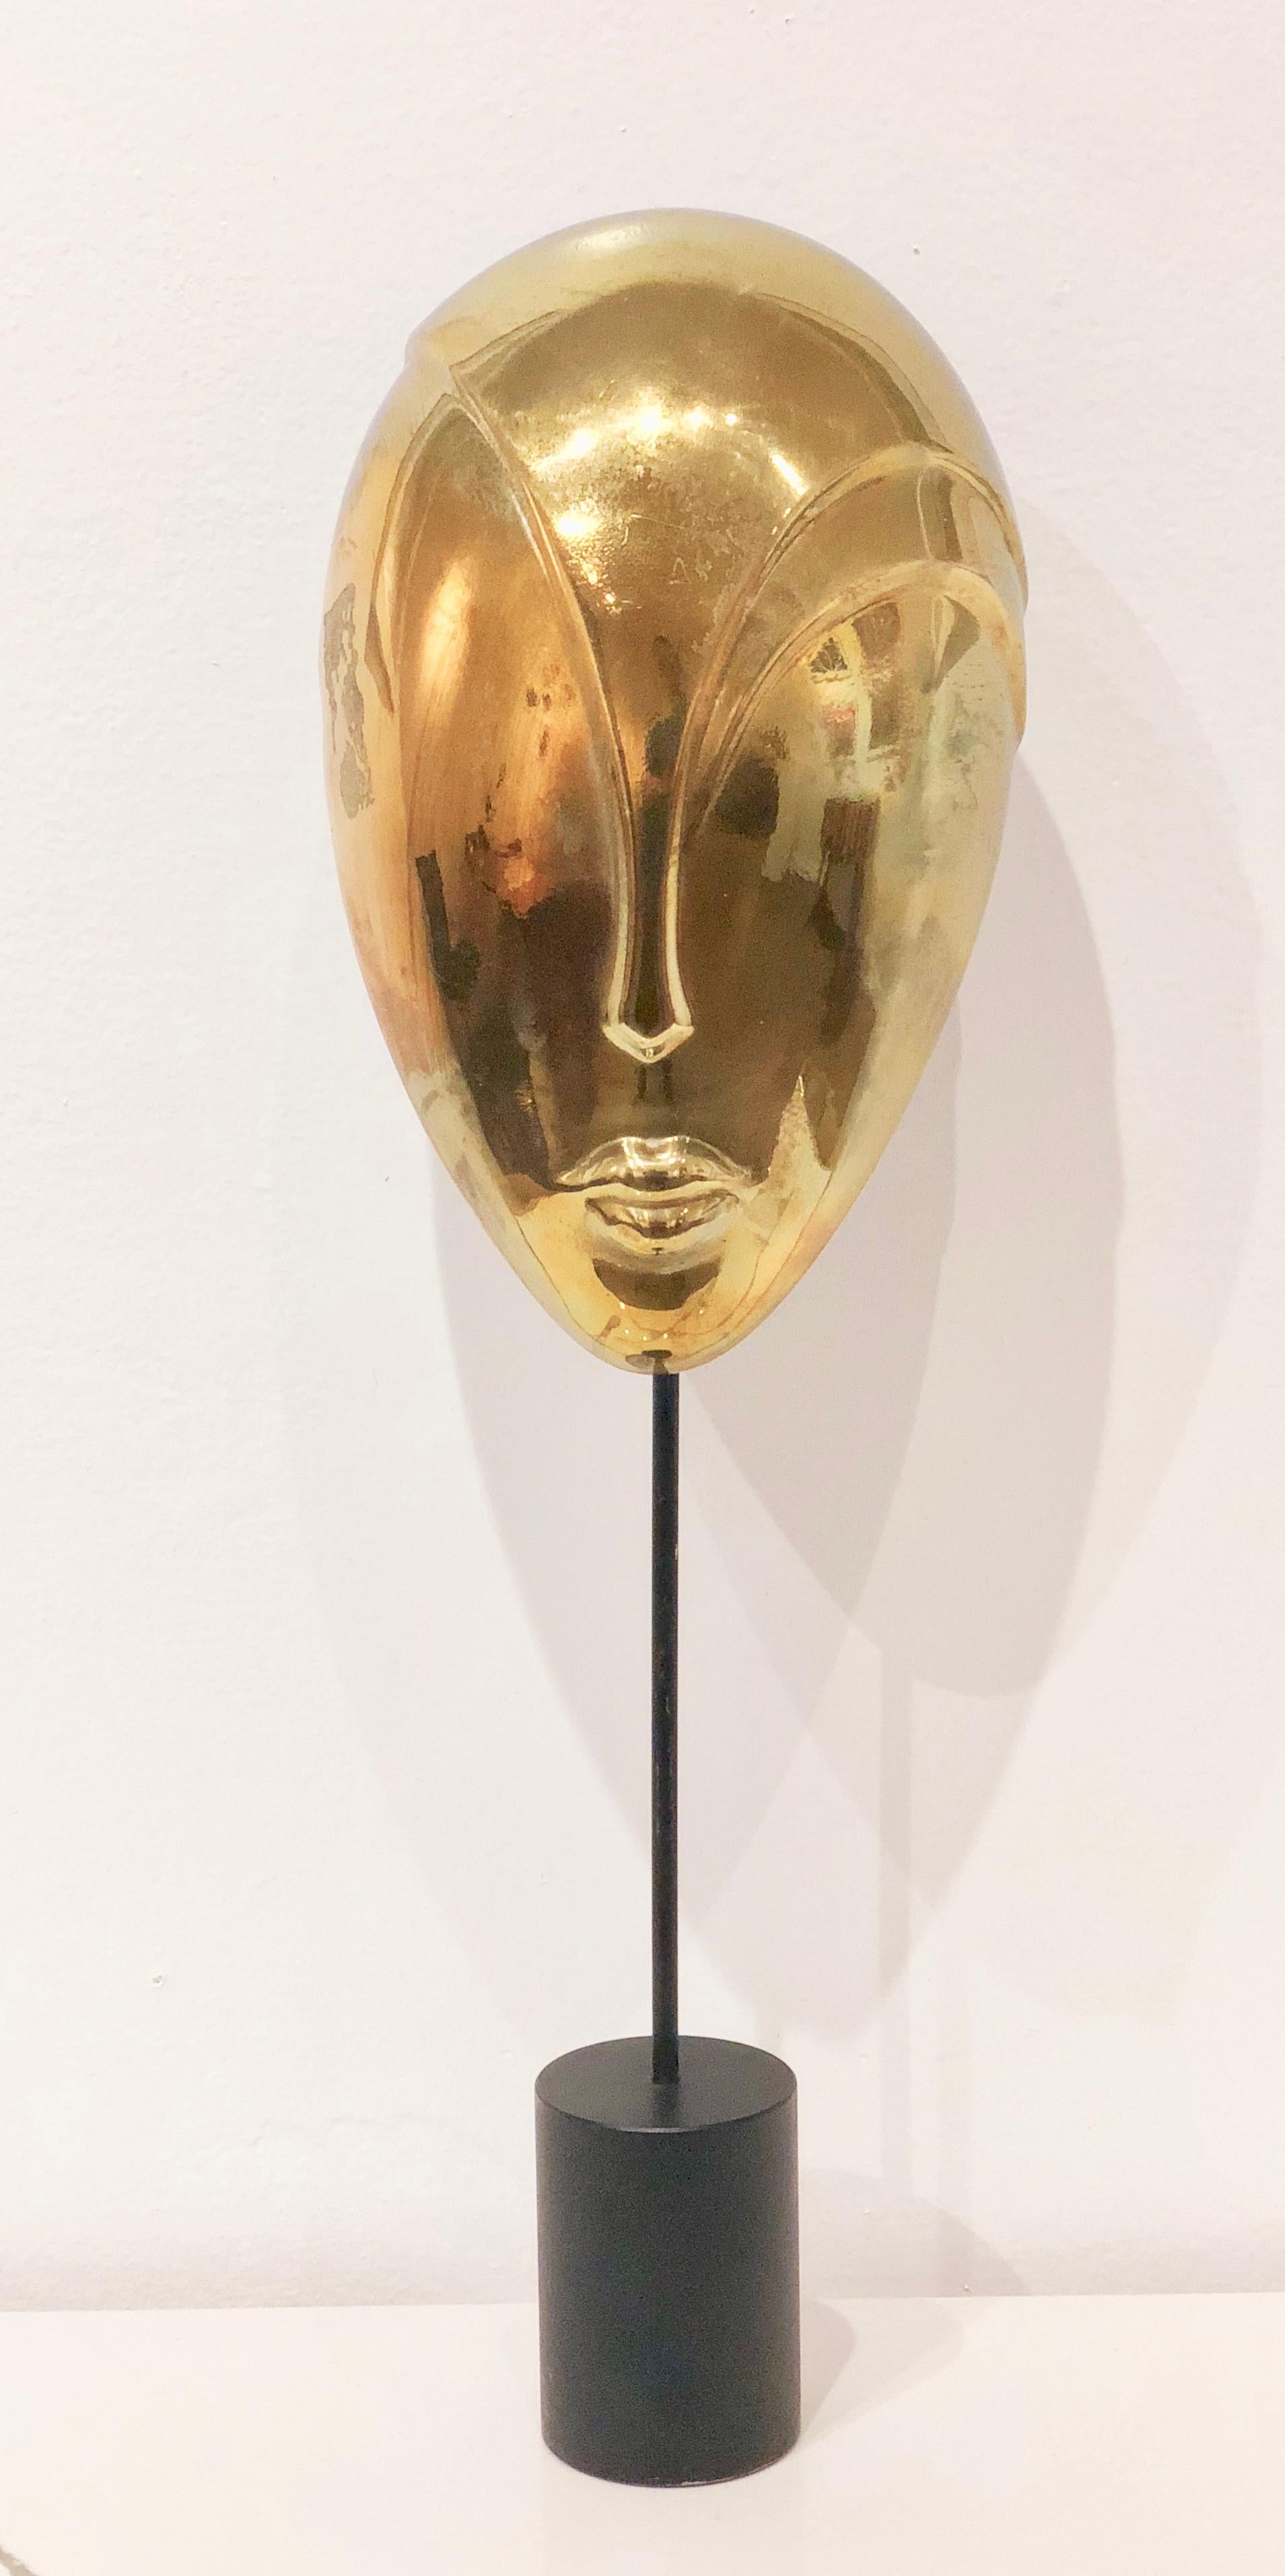 Unique solid brass decorative mask sculpture in polished brass finish with black enamel finish bases.